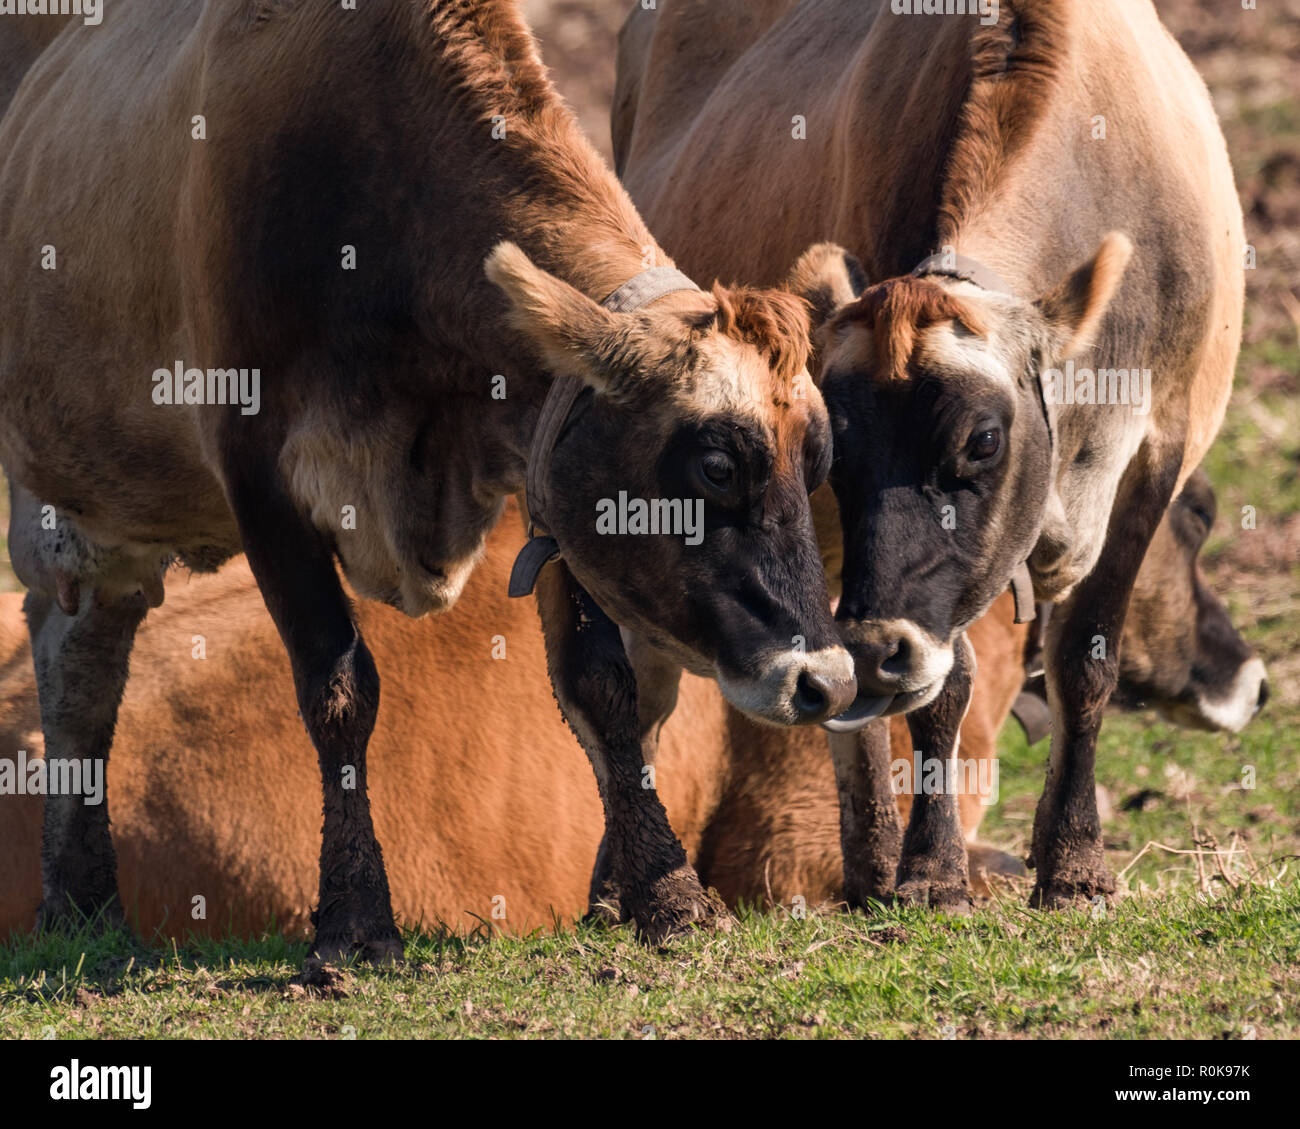 Two affectionate Jersey cows outside in pasture and licking each other affectionately Stock Photo